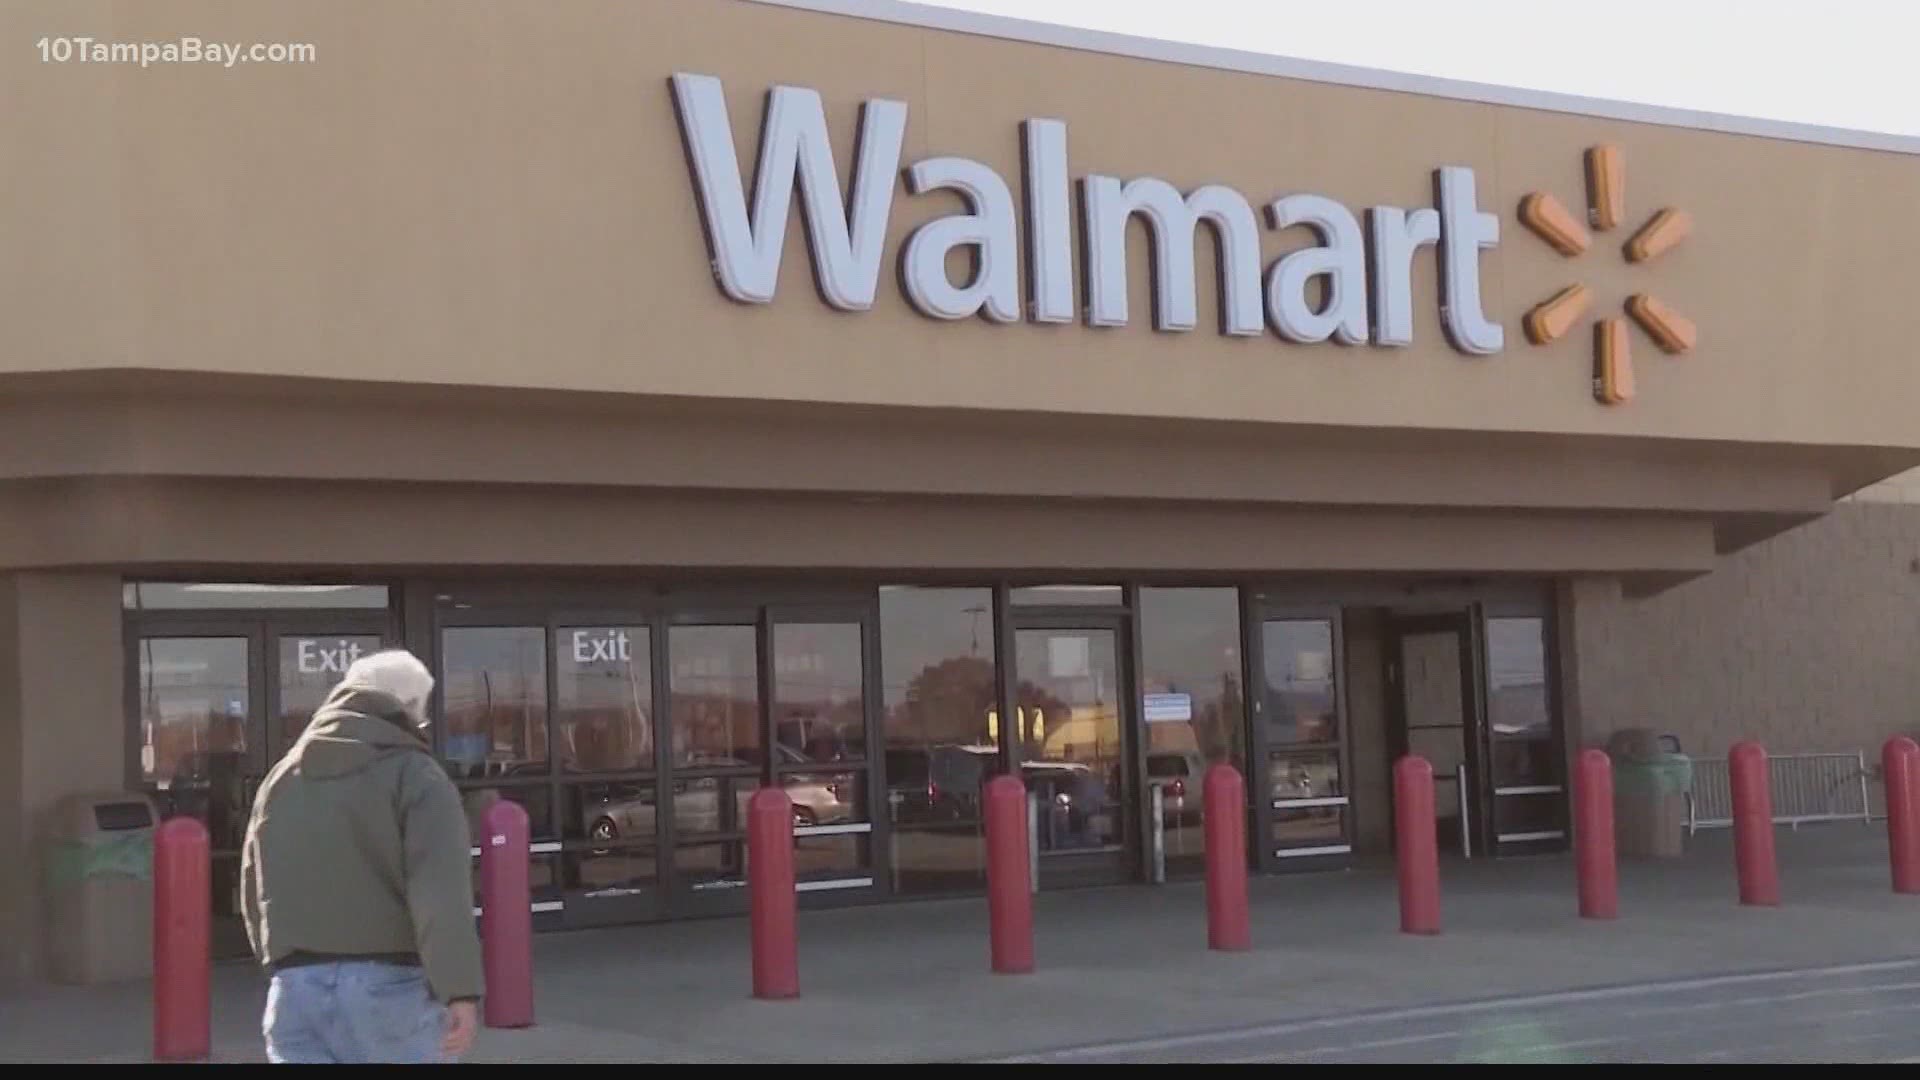 Use these tips during your next trip to Walmart and you could save money.